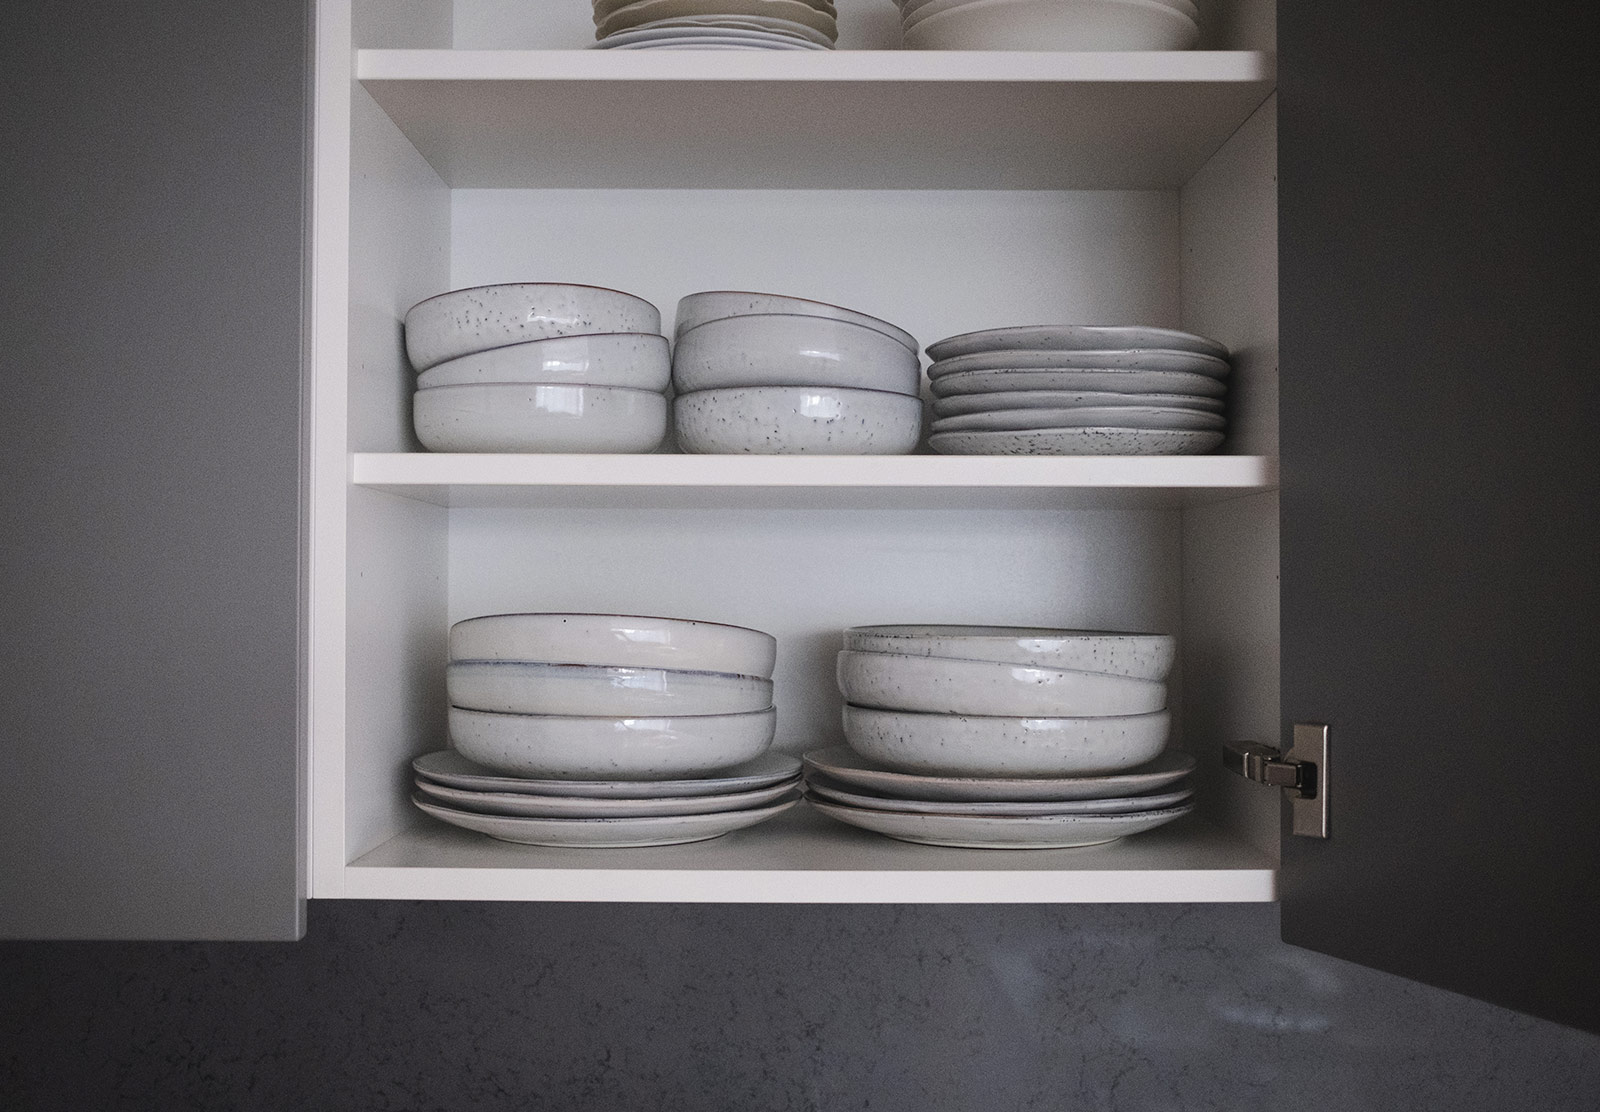 Plates in cupboard